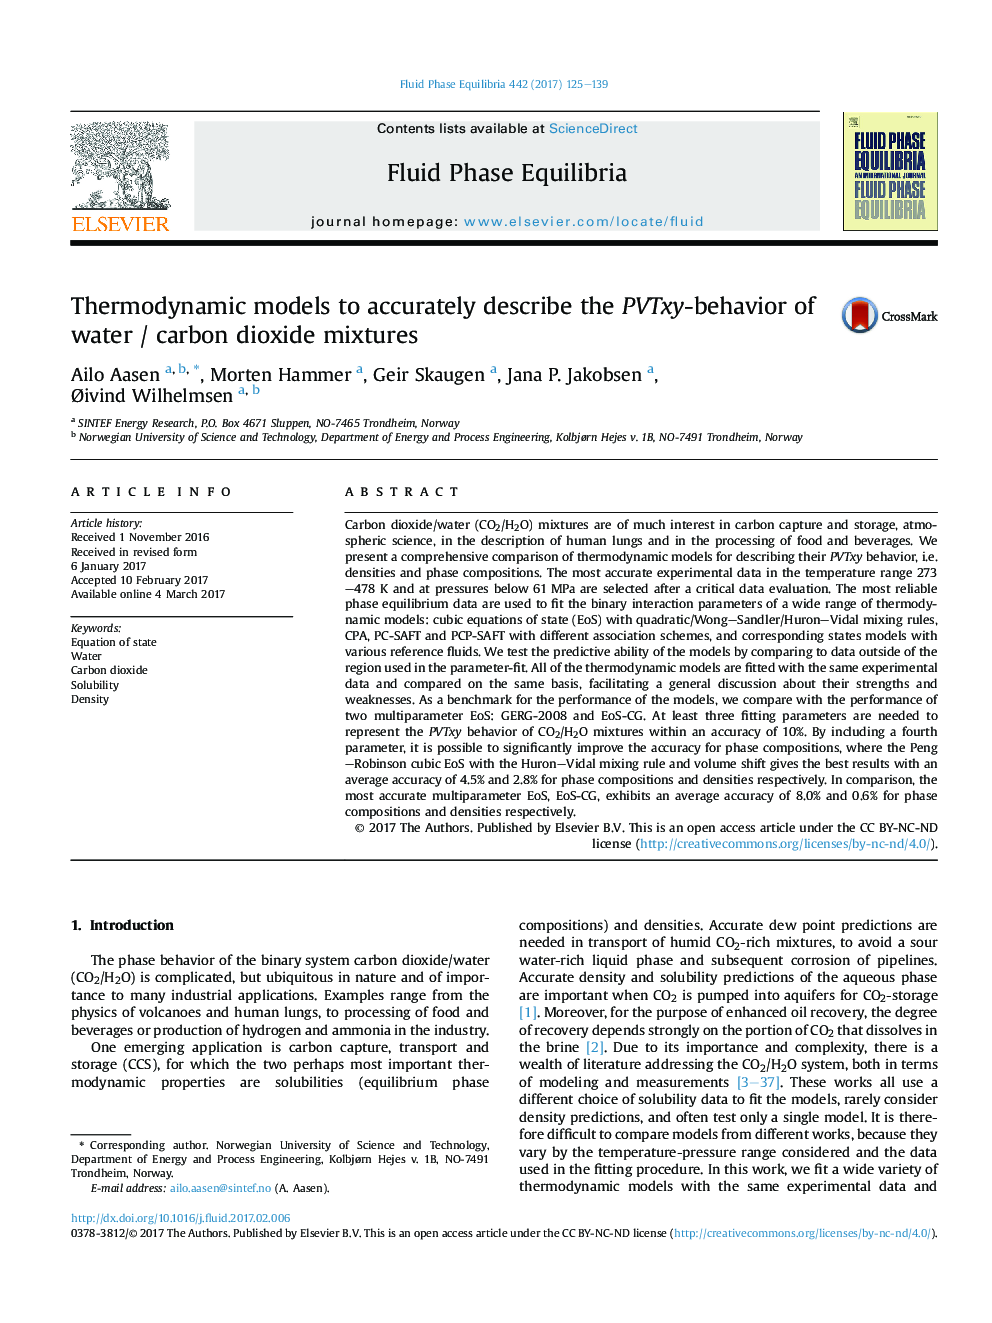 Thermodynamic models to accurately describe the PVTxy-behavior of water / carbon dioxide mixtures